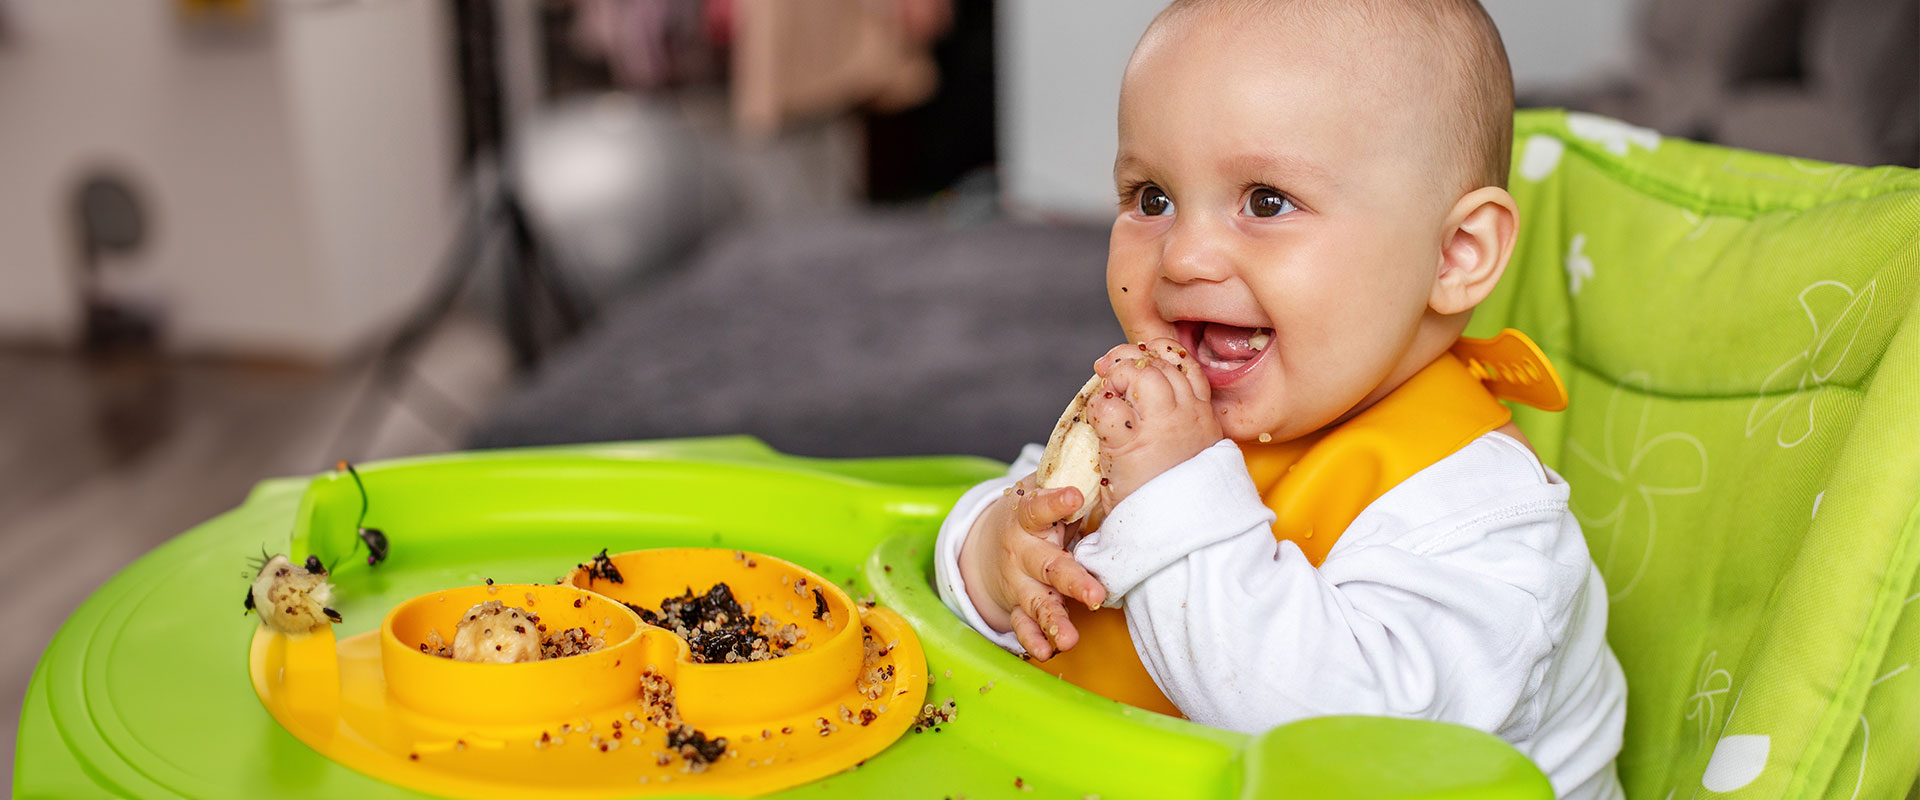 10 Top Tips on Weaning your Baby